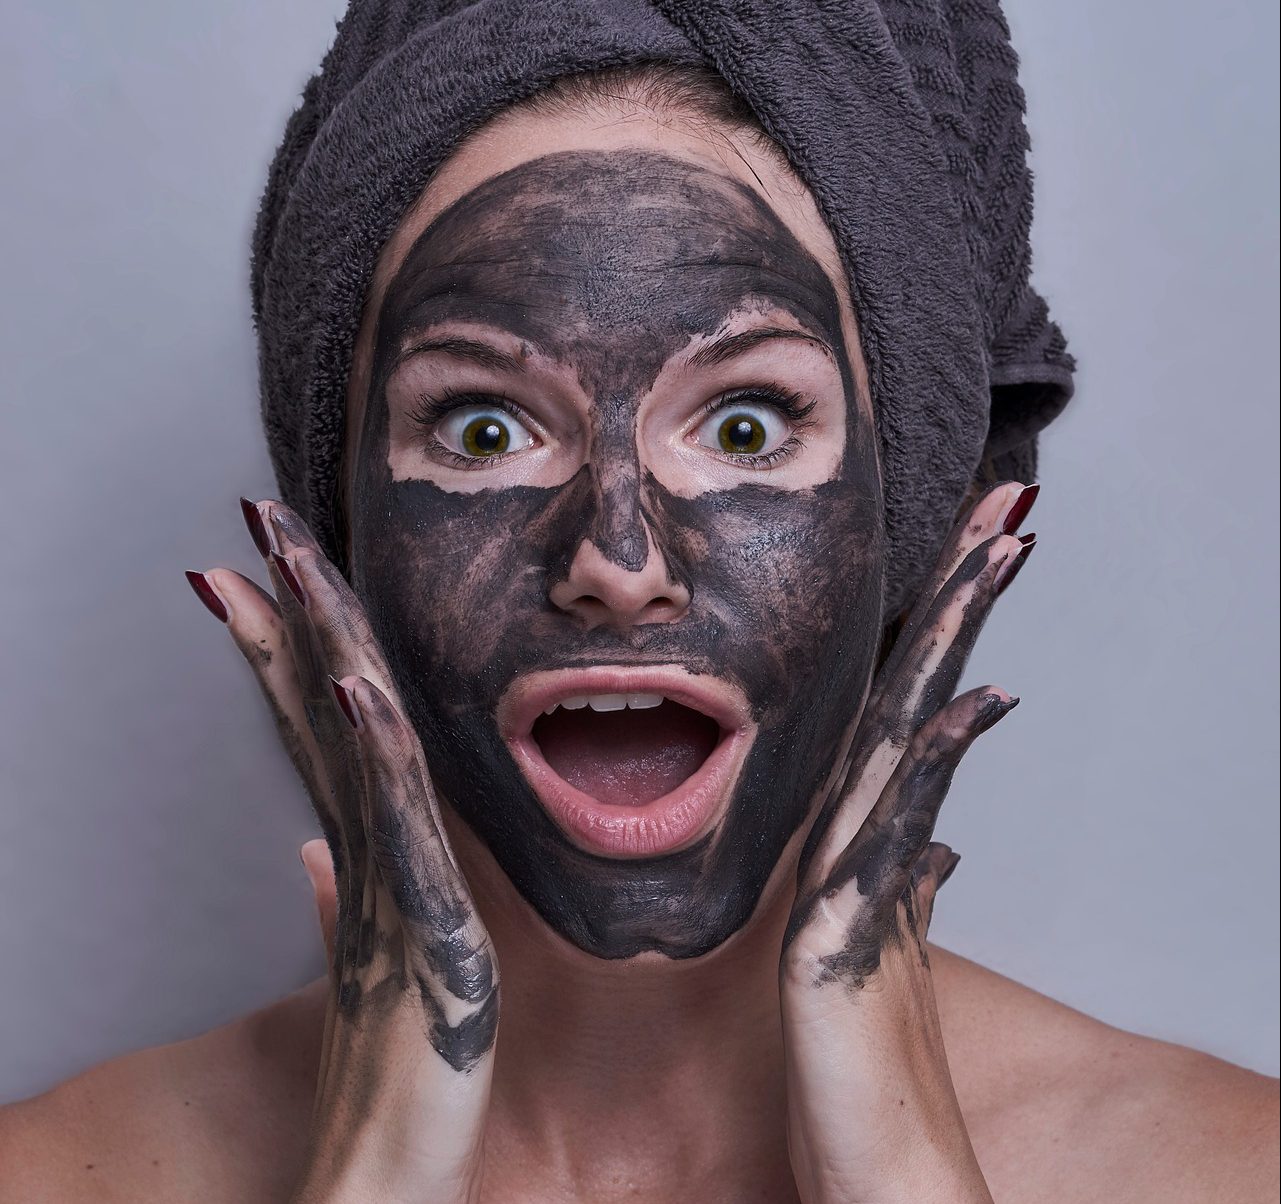 Woman with cosmetic face mask - Source: Unsplash